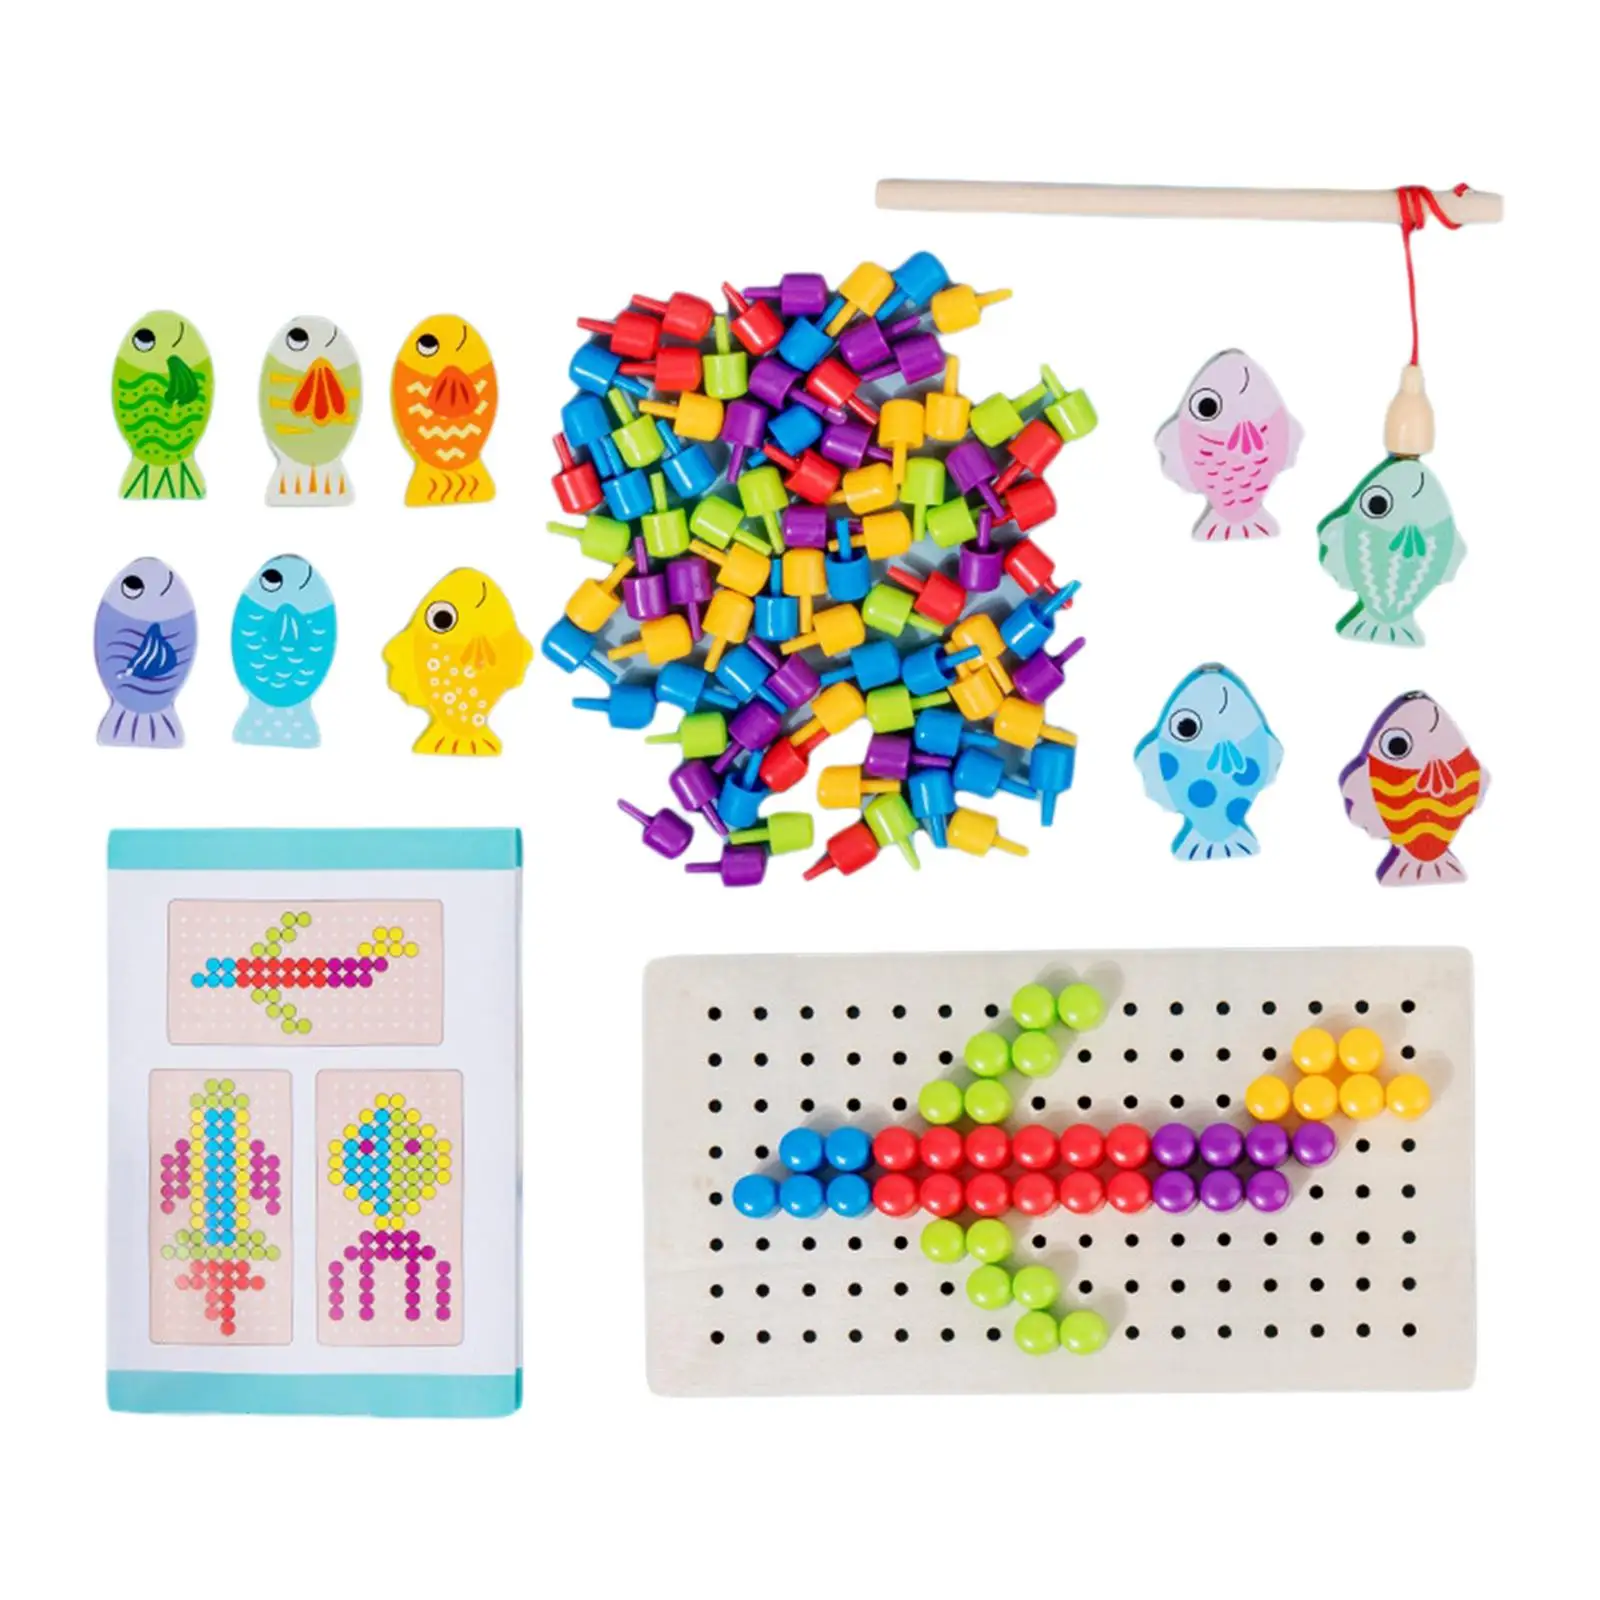 Fishing Game Play Set Novelty including Fishes and Fishing Poles Fishing Board Game for Toddlers Boys Kids Girls Holiday Gifts